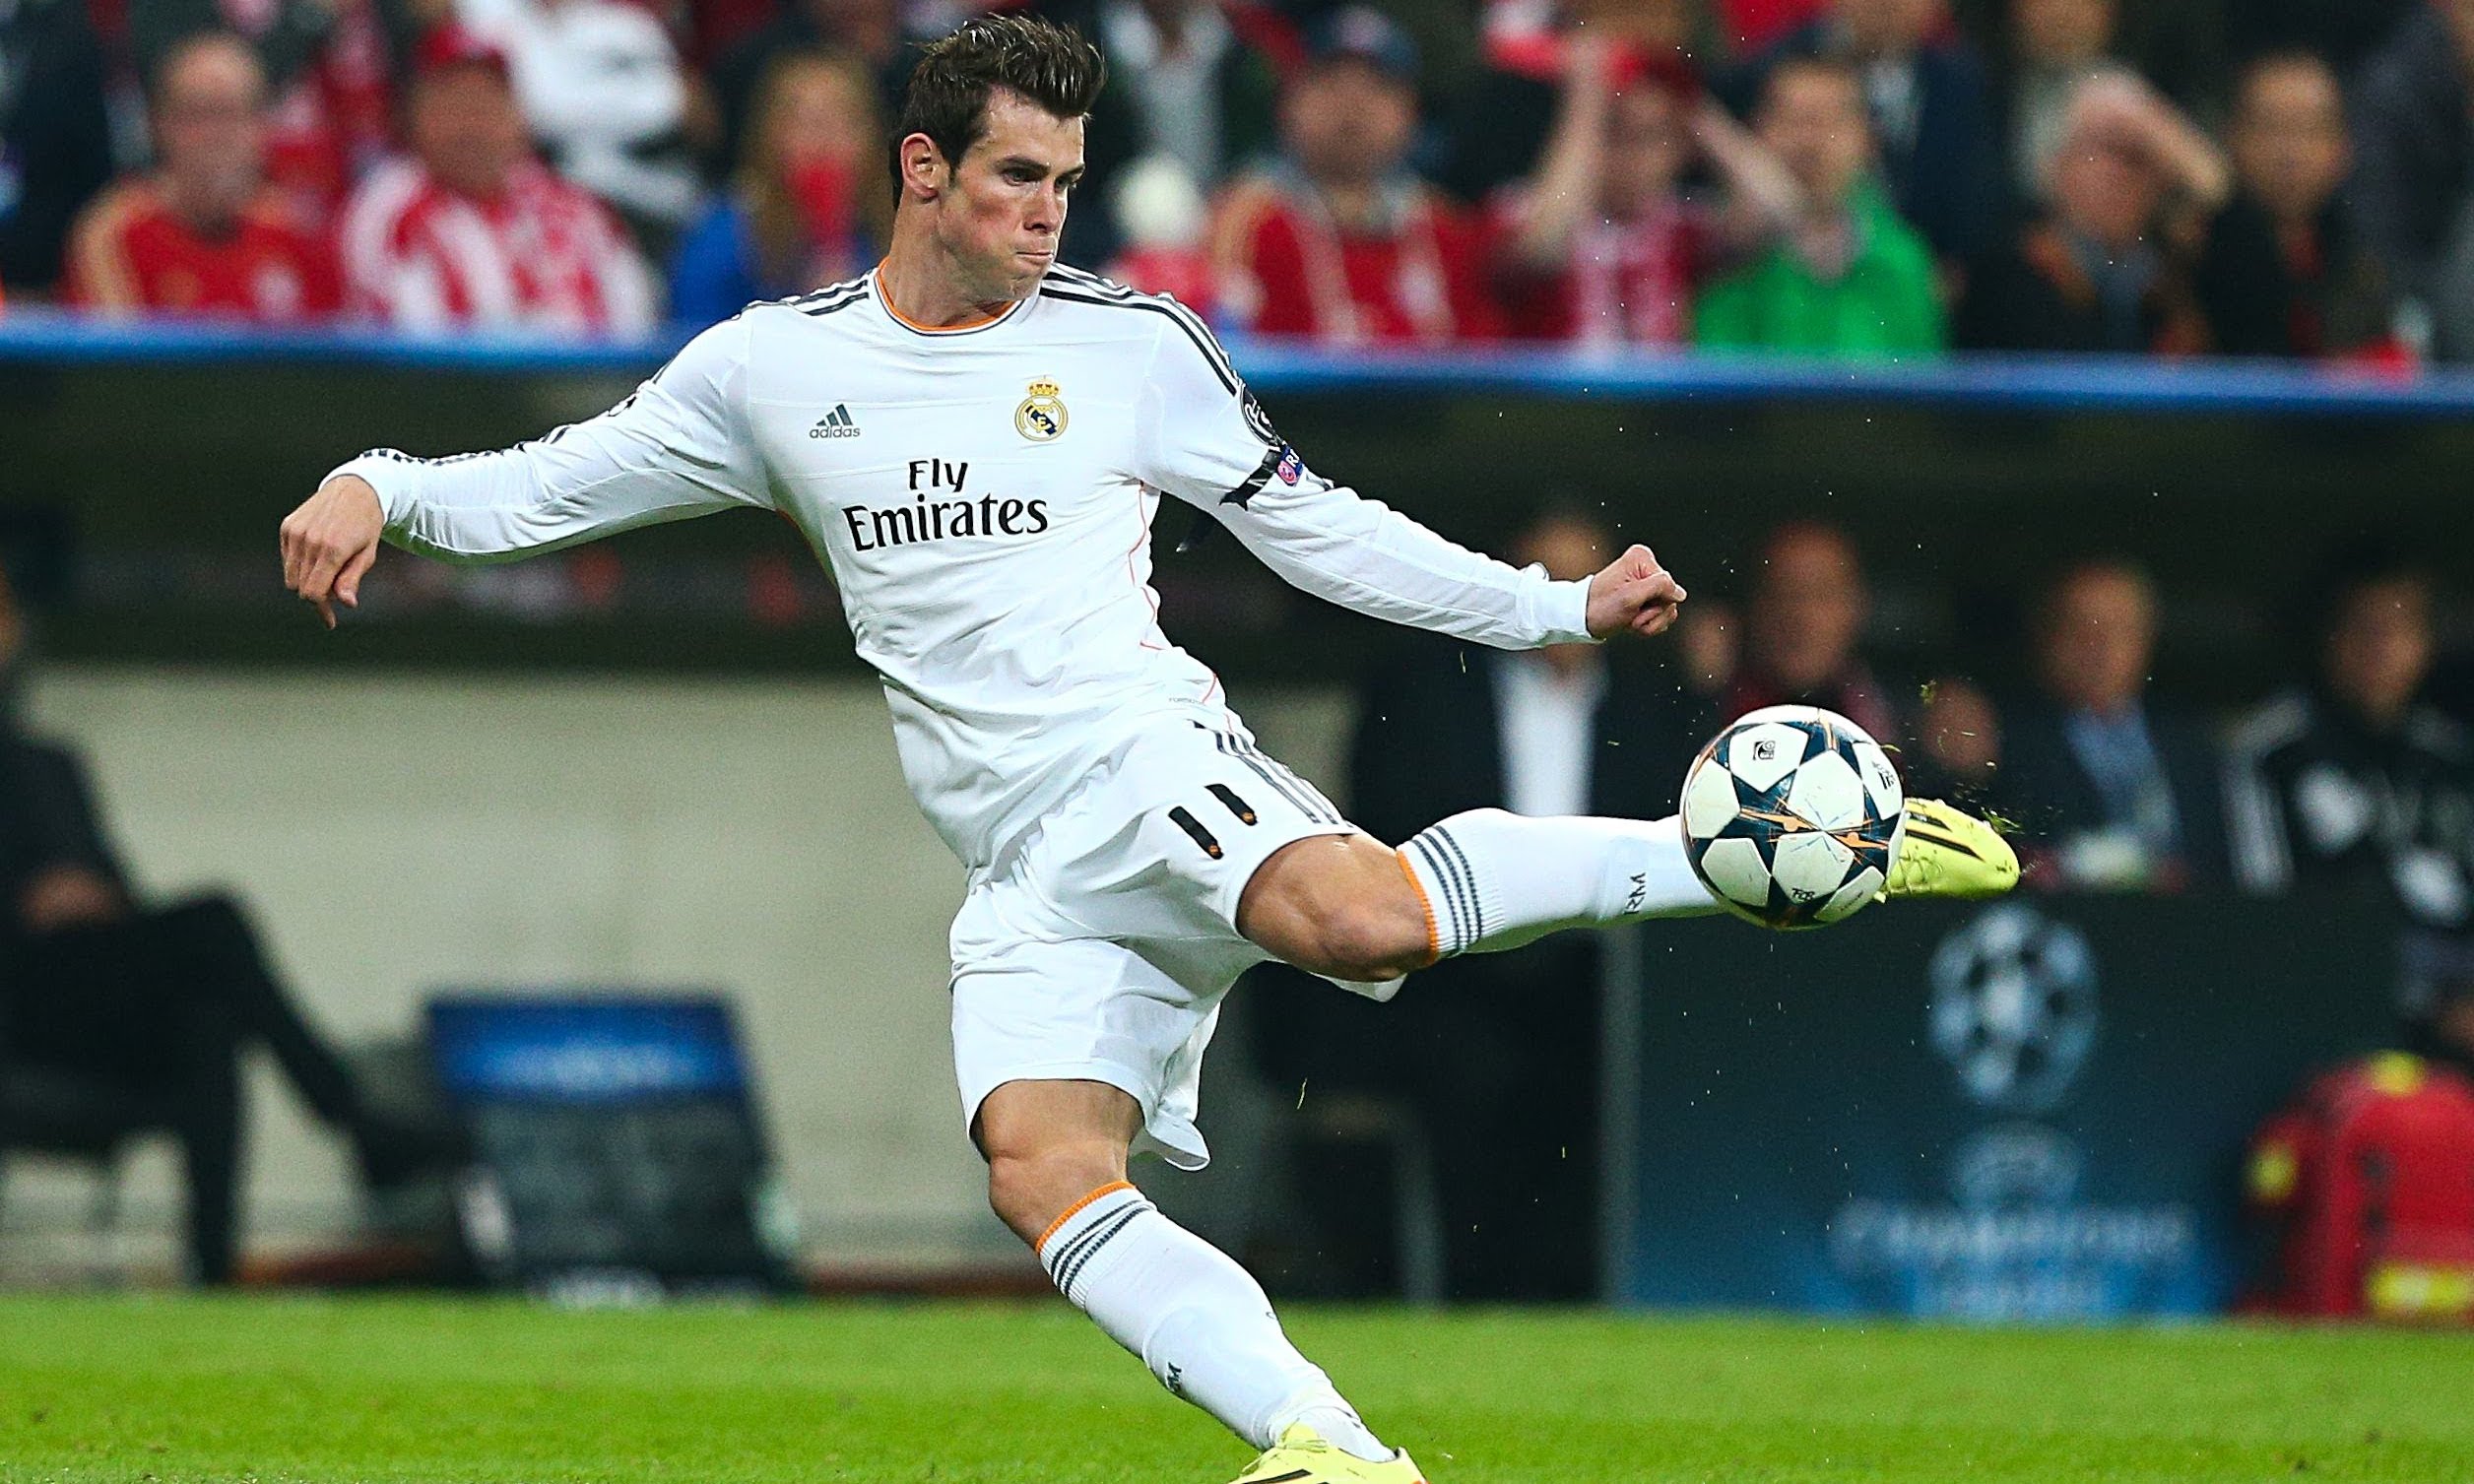 Gareth Bale Wallpapers, Pictures, Images